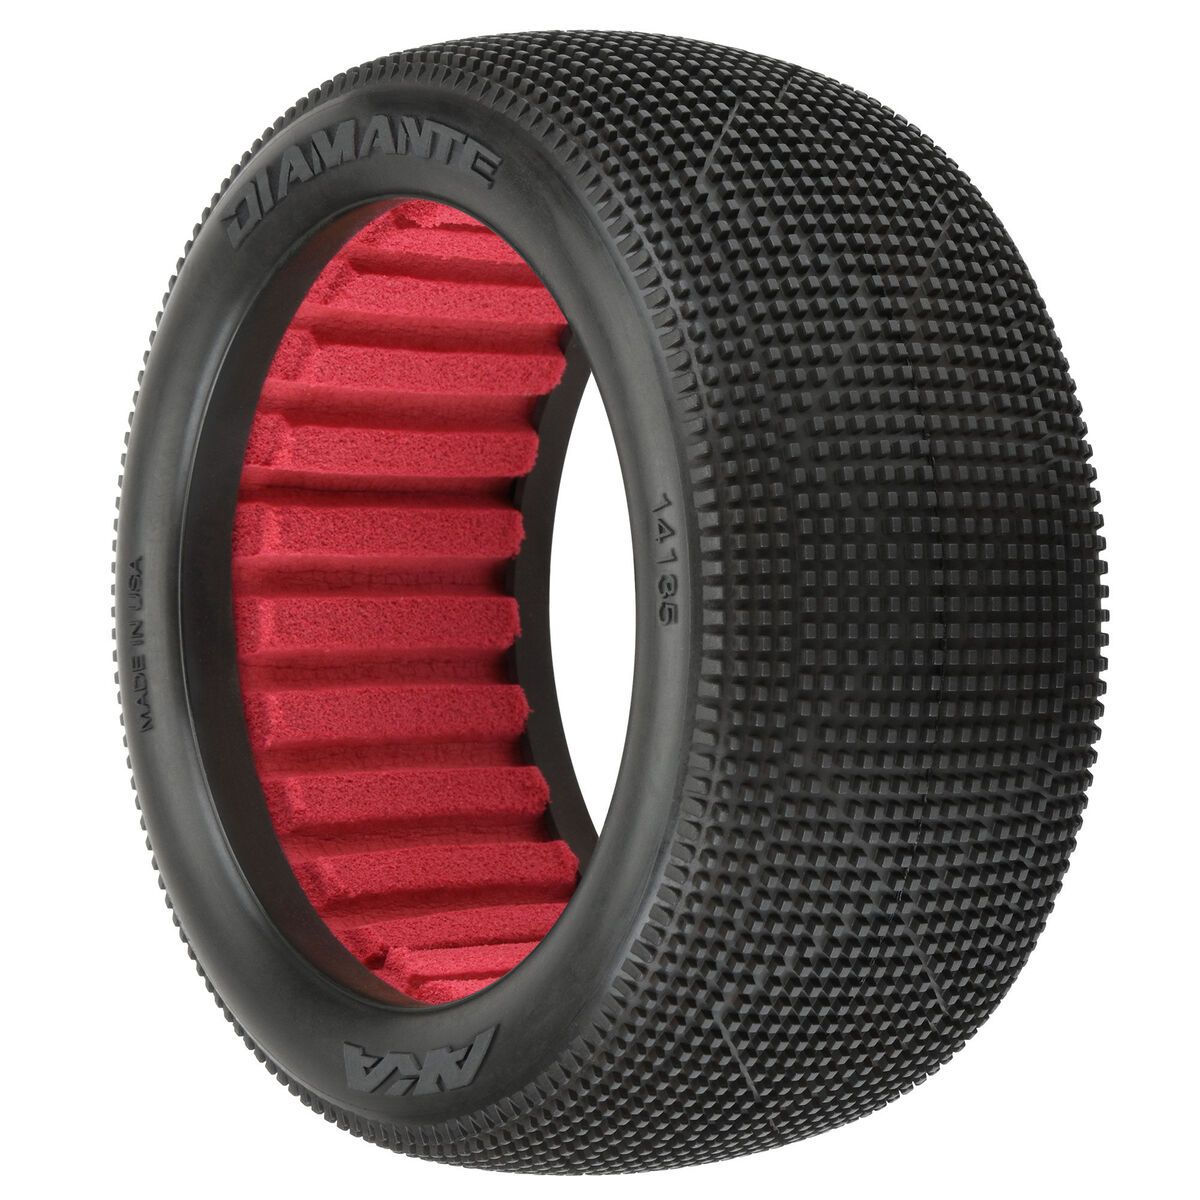 AKA Products, Inc. 14135XR 1:8 Diamante X Front/Rear 4.0" Off-Road Truck Tires